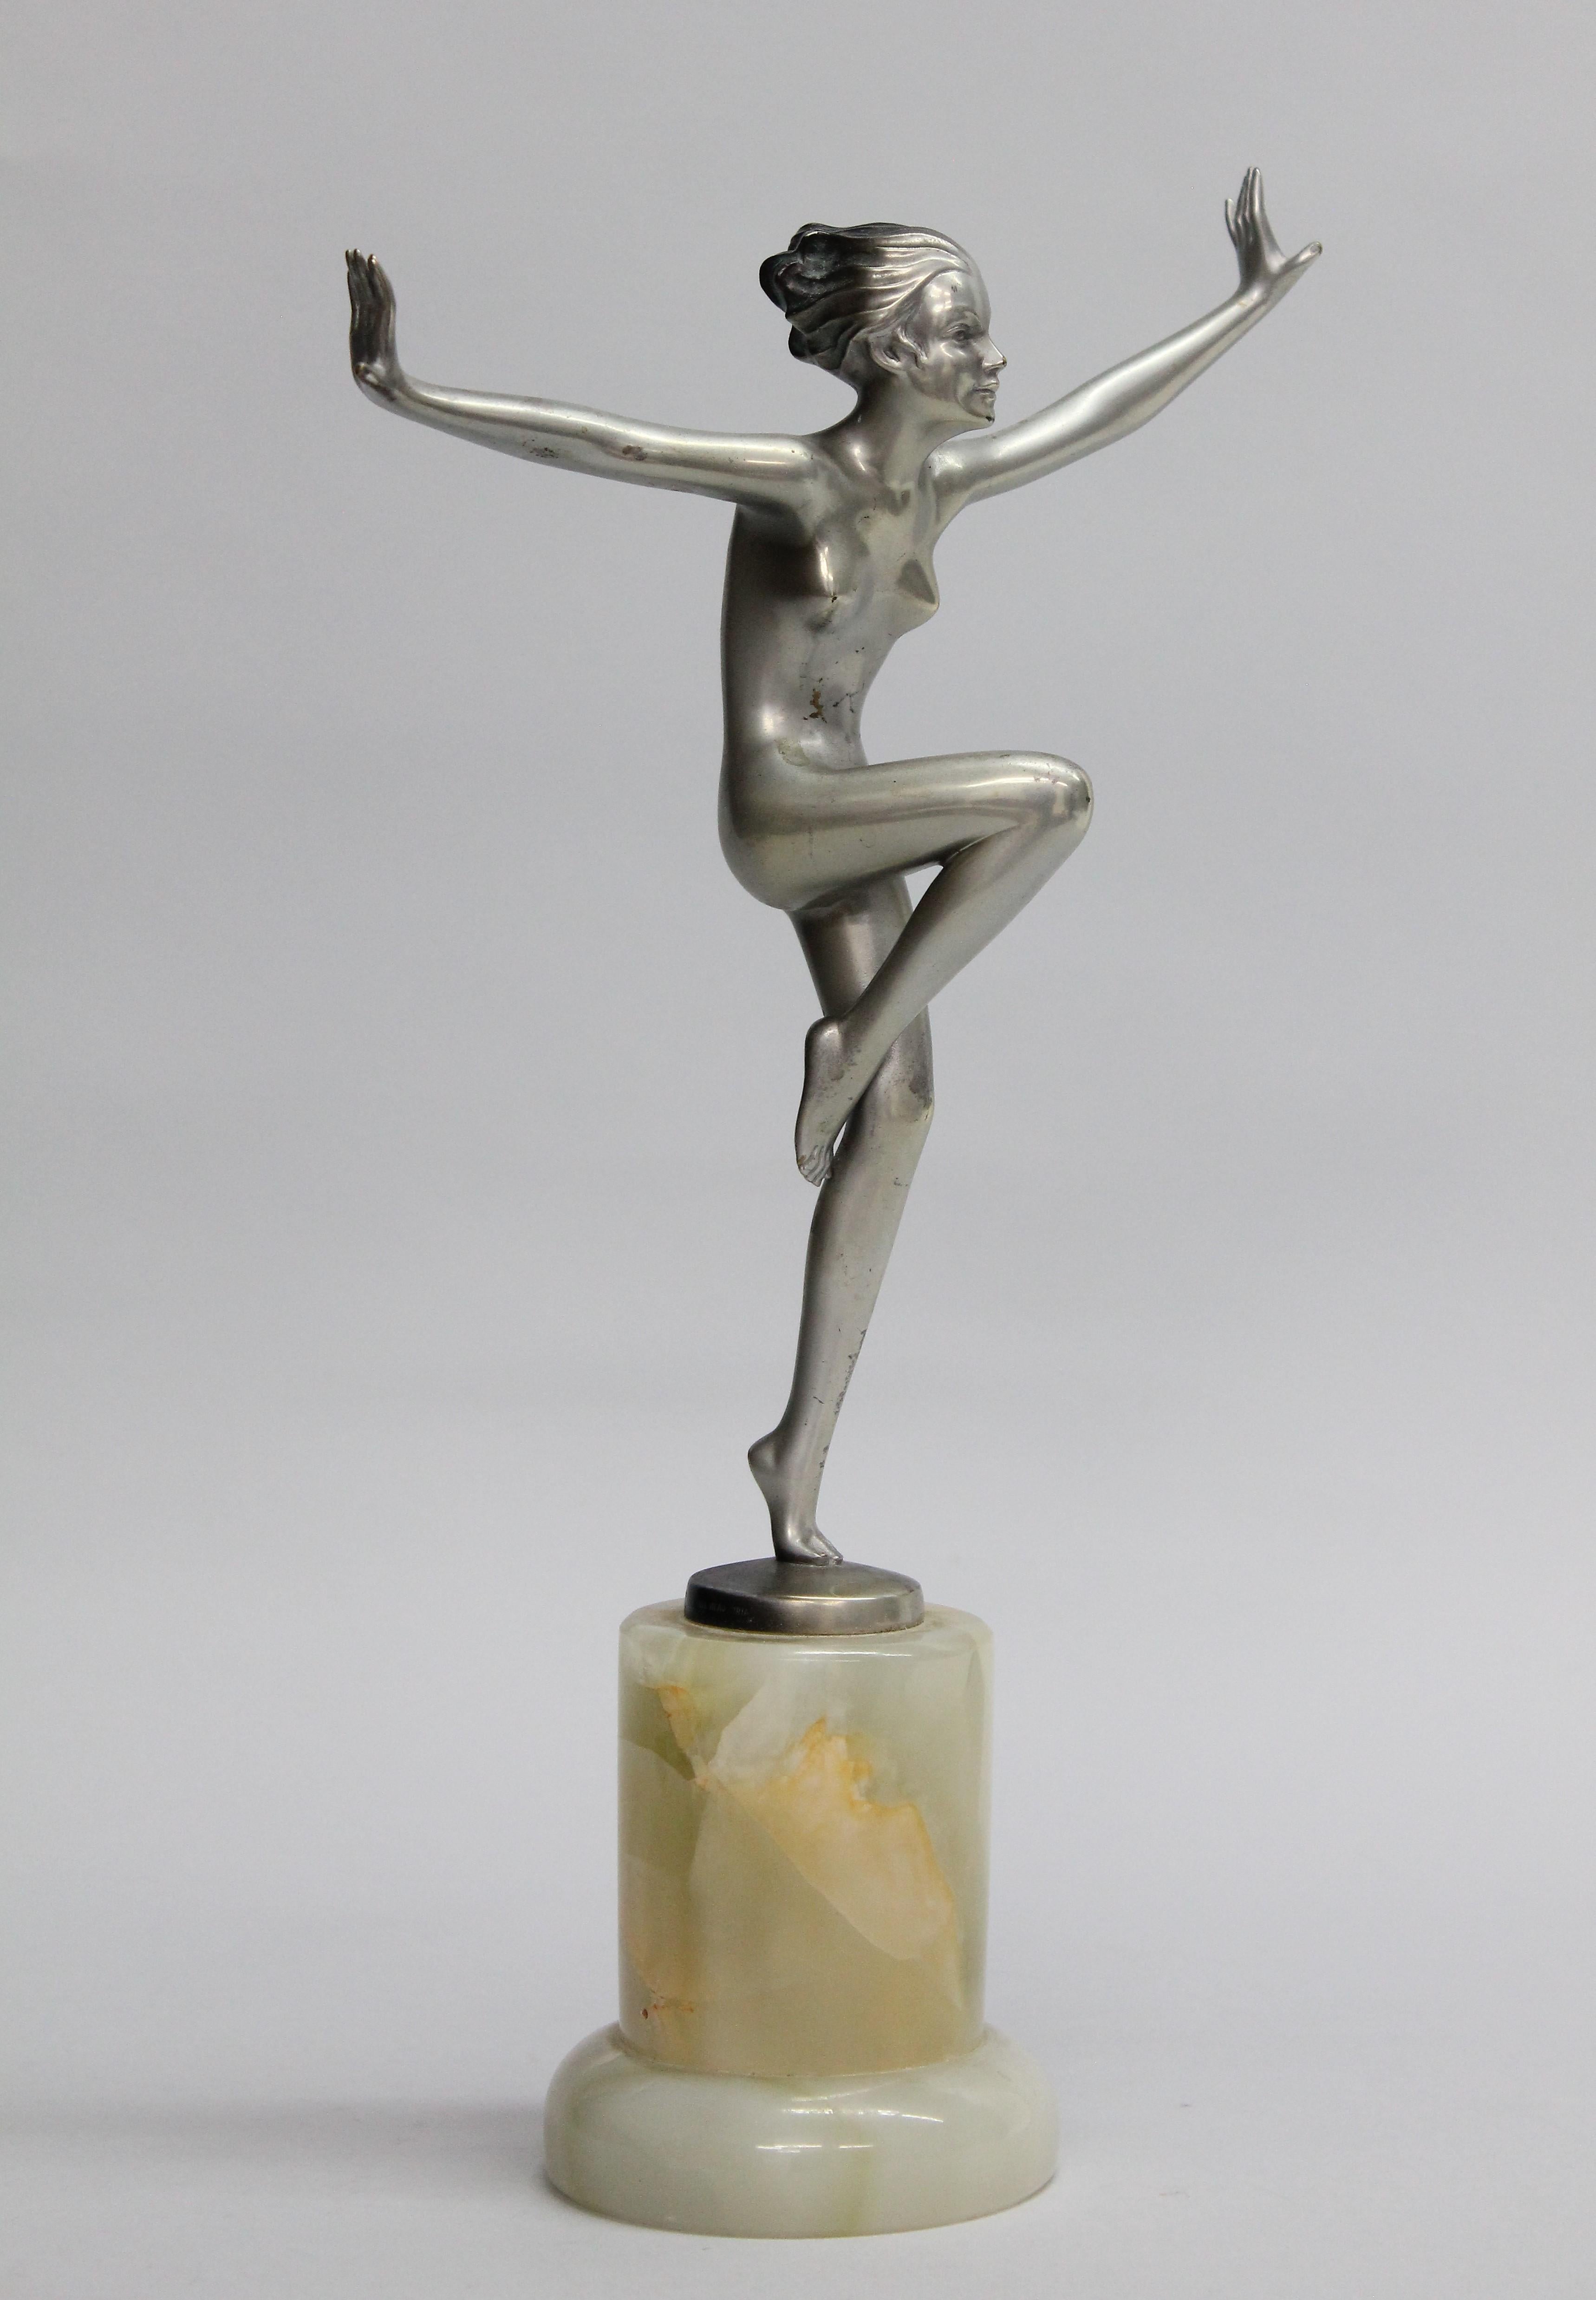 Josef Lorenzl Art Deco bronze sculpture.

Size: Height 33cm.
The cold painted bronze sculpture is mounted on a Brazilian green onyx plinth.
All in an original condition. It has not been later painted or patinated.
Signed 